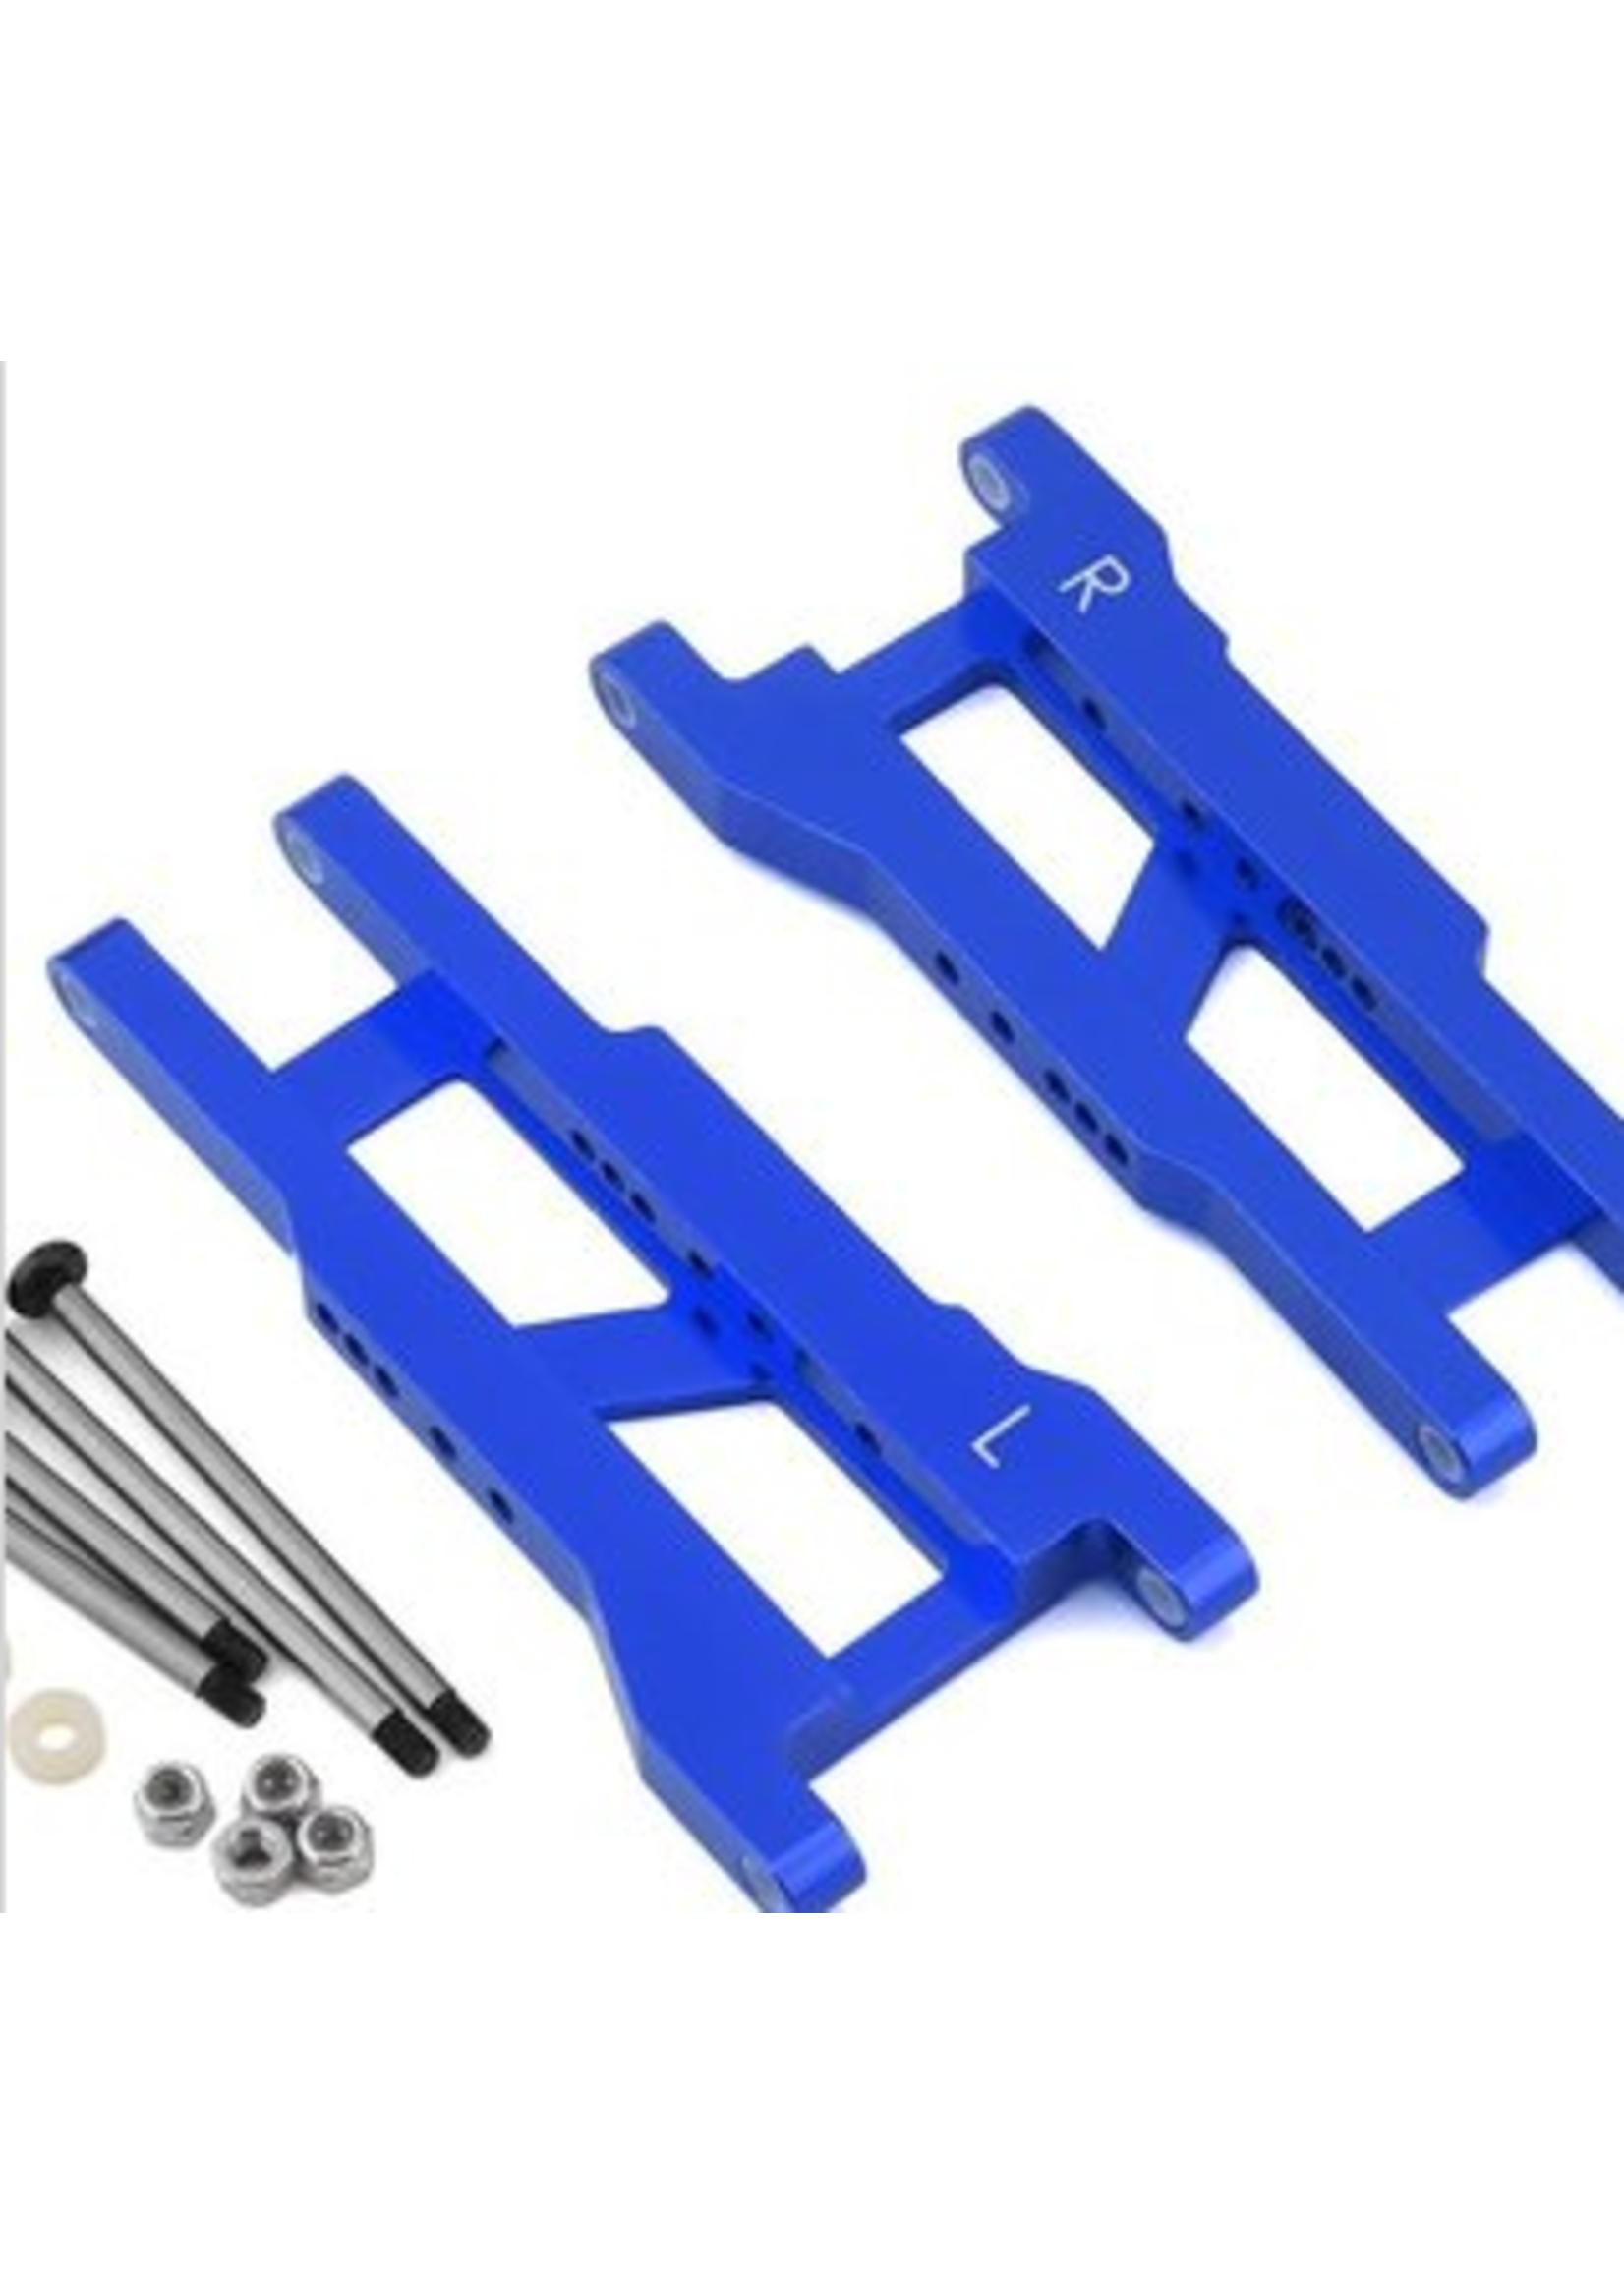 ST Racing Concepts SPTST3655XB ST Racing Concepts Heavy Duty Rear Suspension Arm Kit w/ Lock-Nut Hinge-Pins for Traxxas Rustler/Stampede 2WD (Blue)